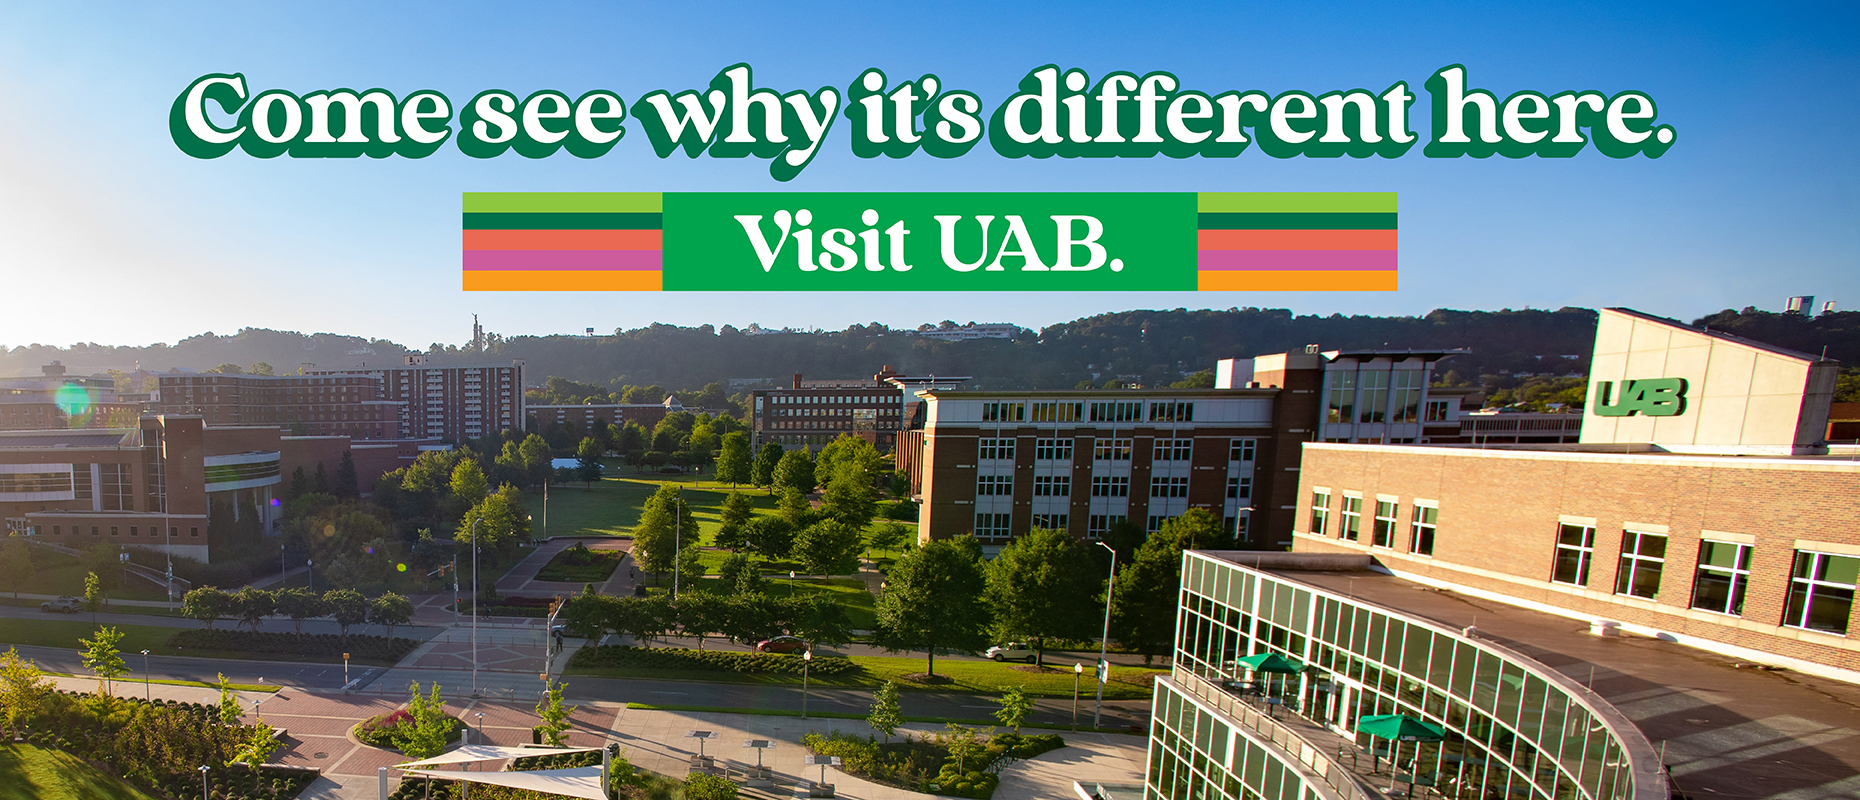 Come see why it's different here. Visit UAB.